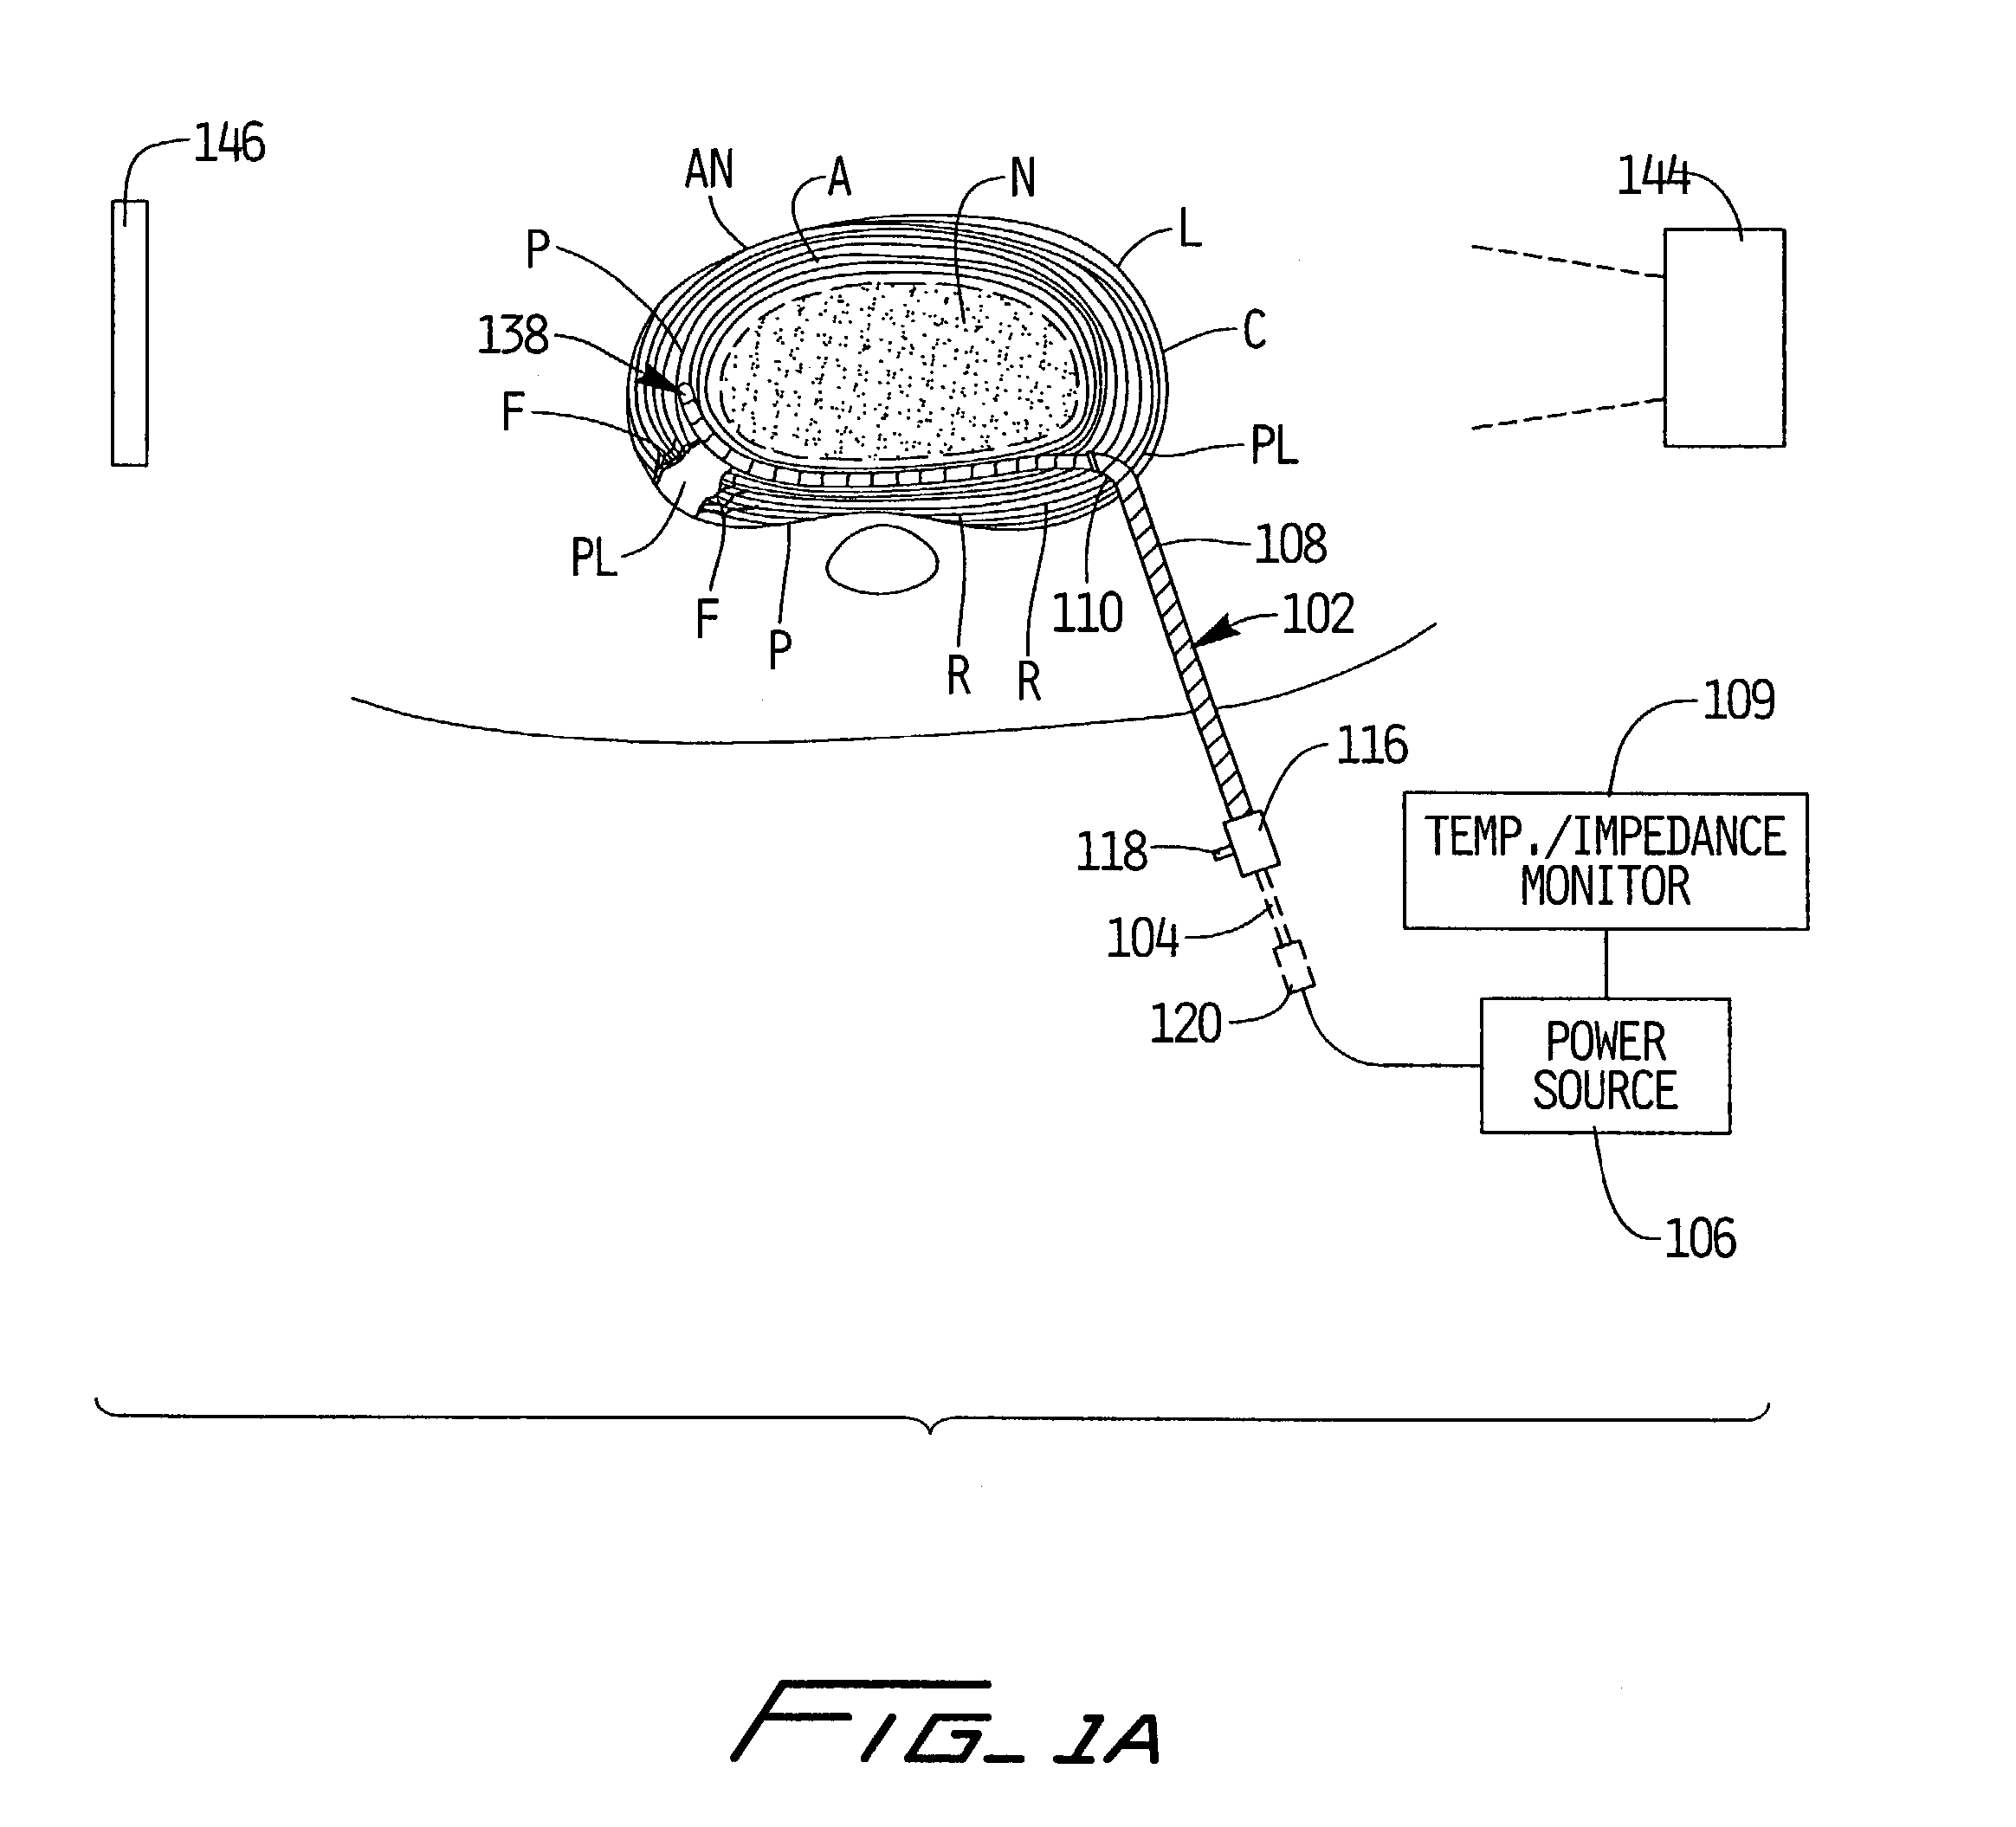 Apparatus and method for treatment of an intervertebral disc